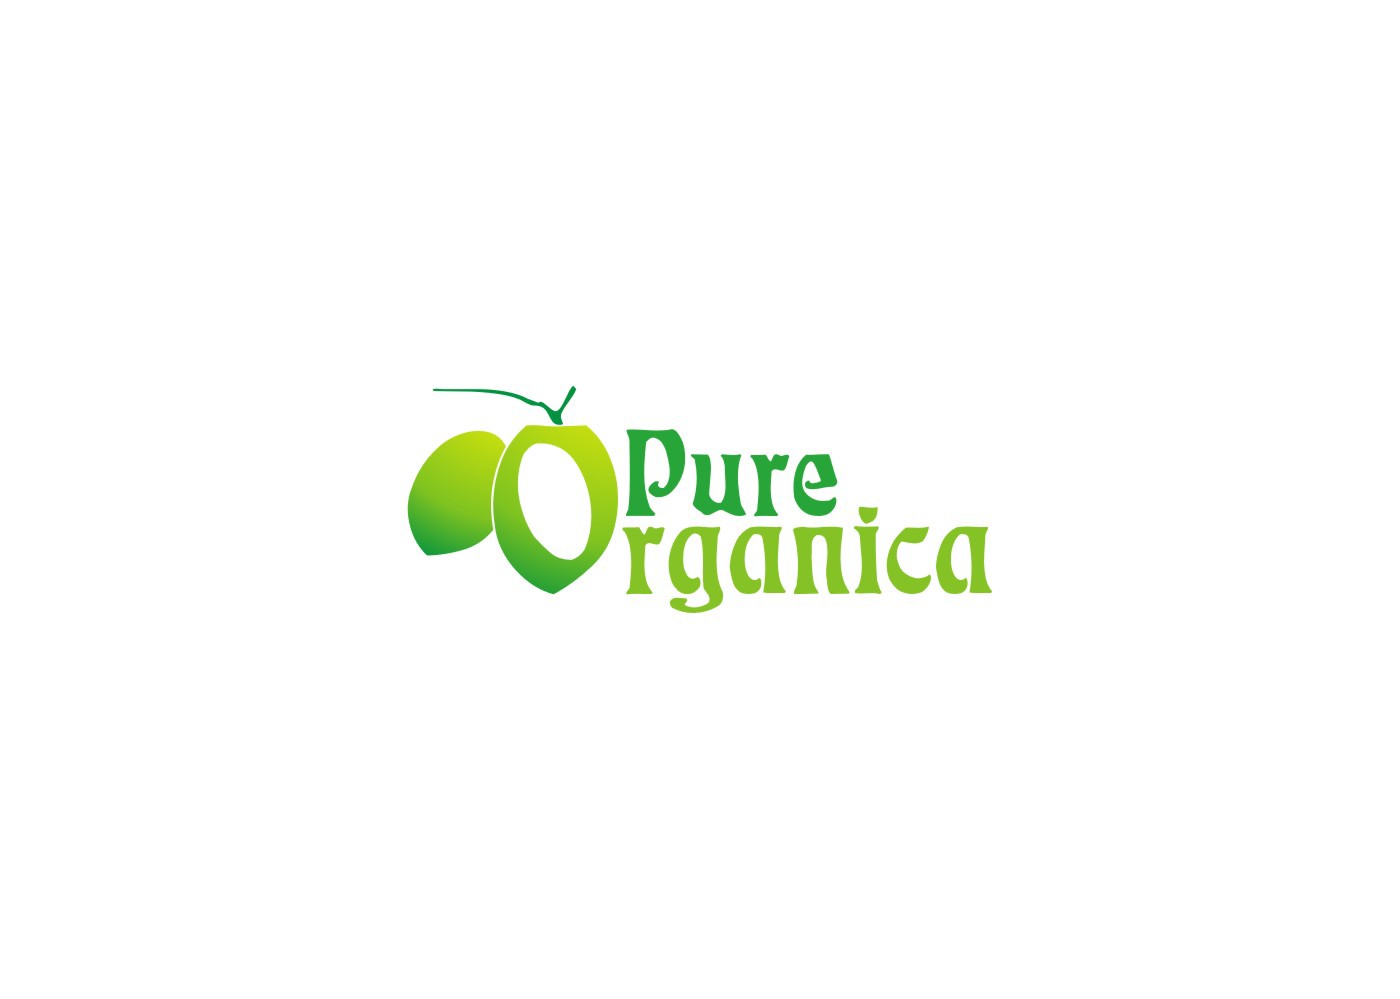 nutraceuticals natural food products Green logo organic logo